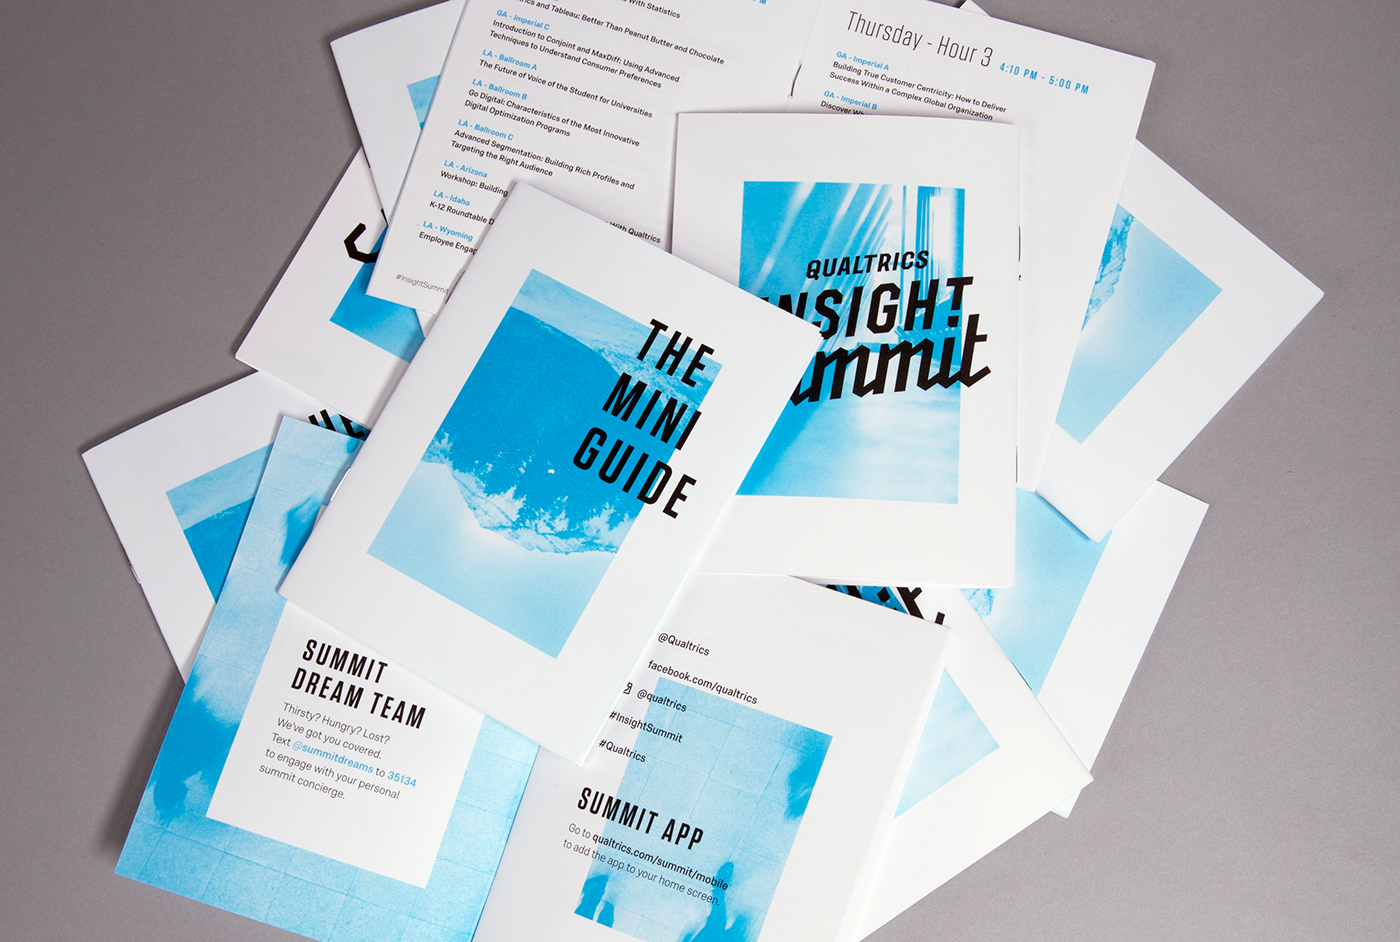 book Guide event guide Event conference Conference guide Booklet editorial summit qualtrics Layout type print schedule publication